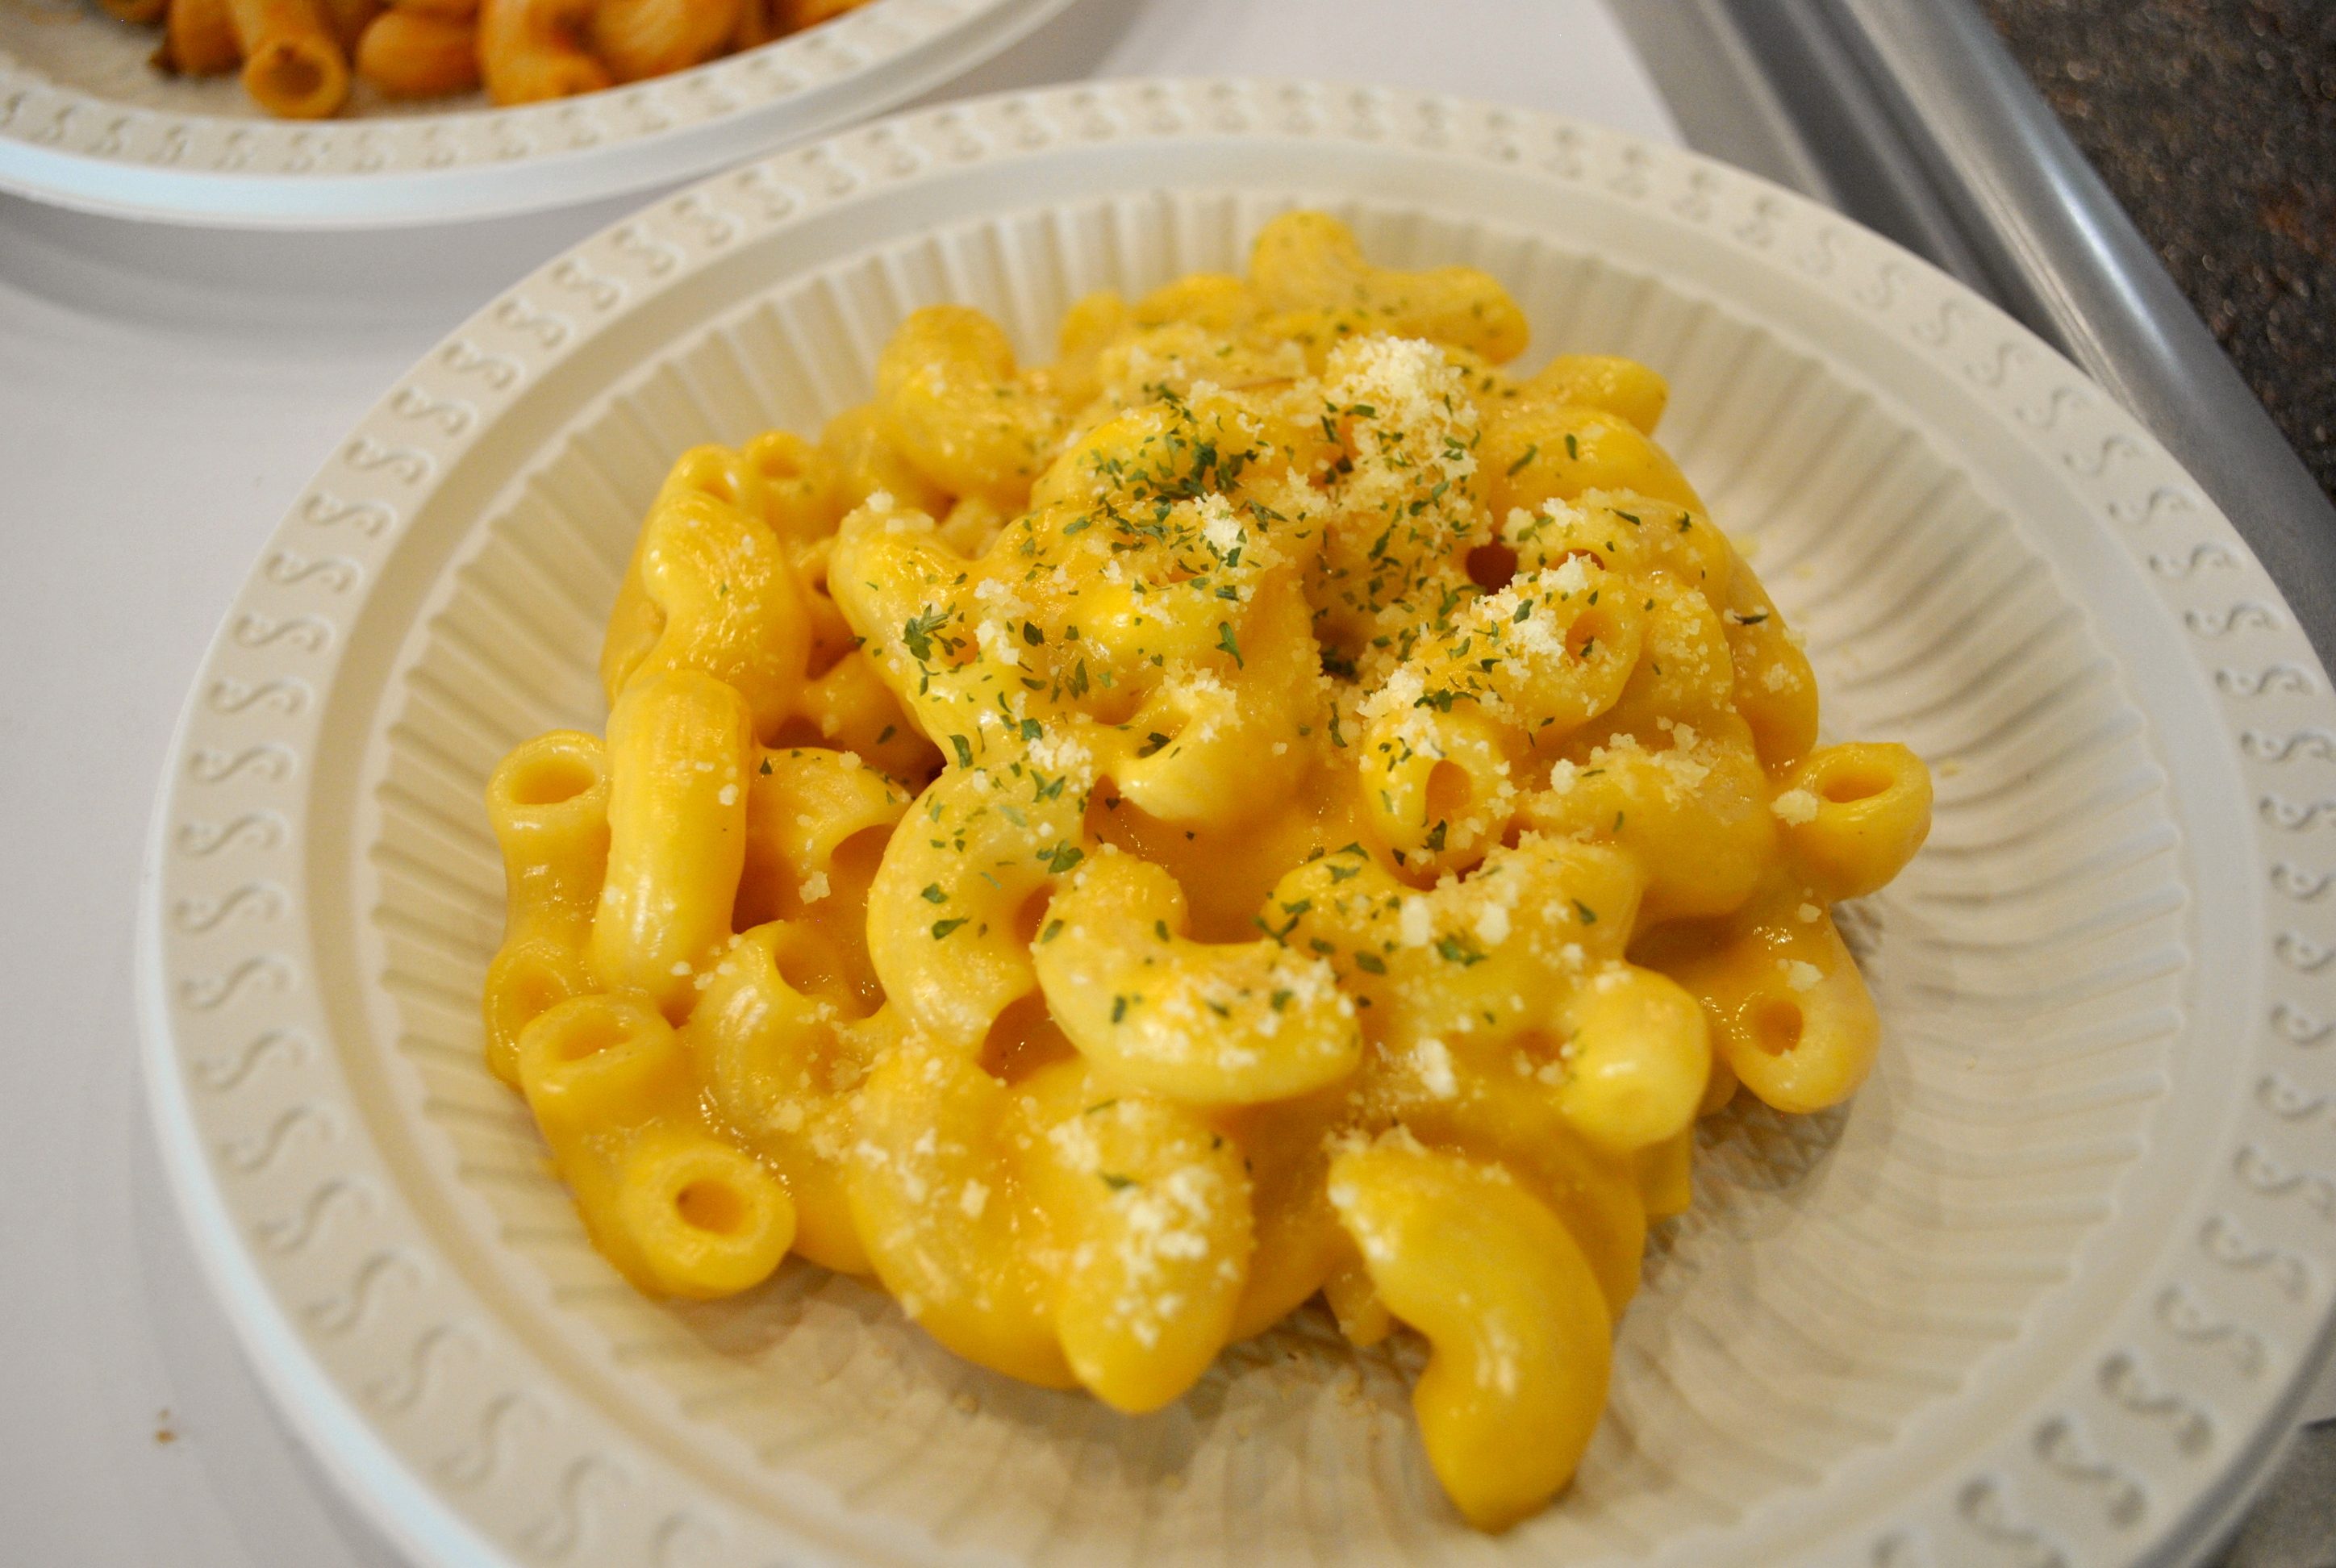 MAC AND CHEESE. Both the young ones and the oldies will enjoy Pops' macaroni noodles mixed in a light, cheddar cheesy sauce. Photo by Steph Arnaldo/Rappler 